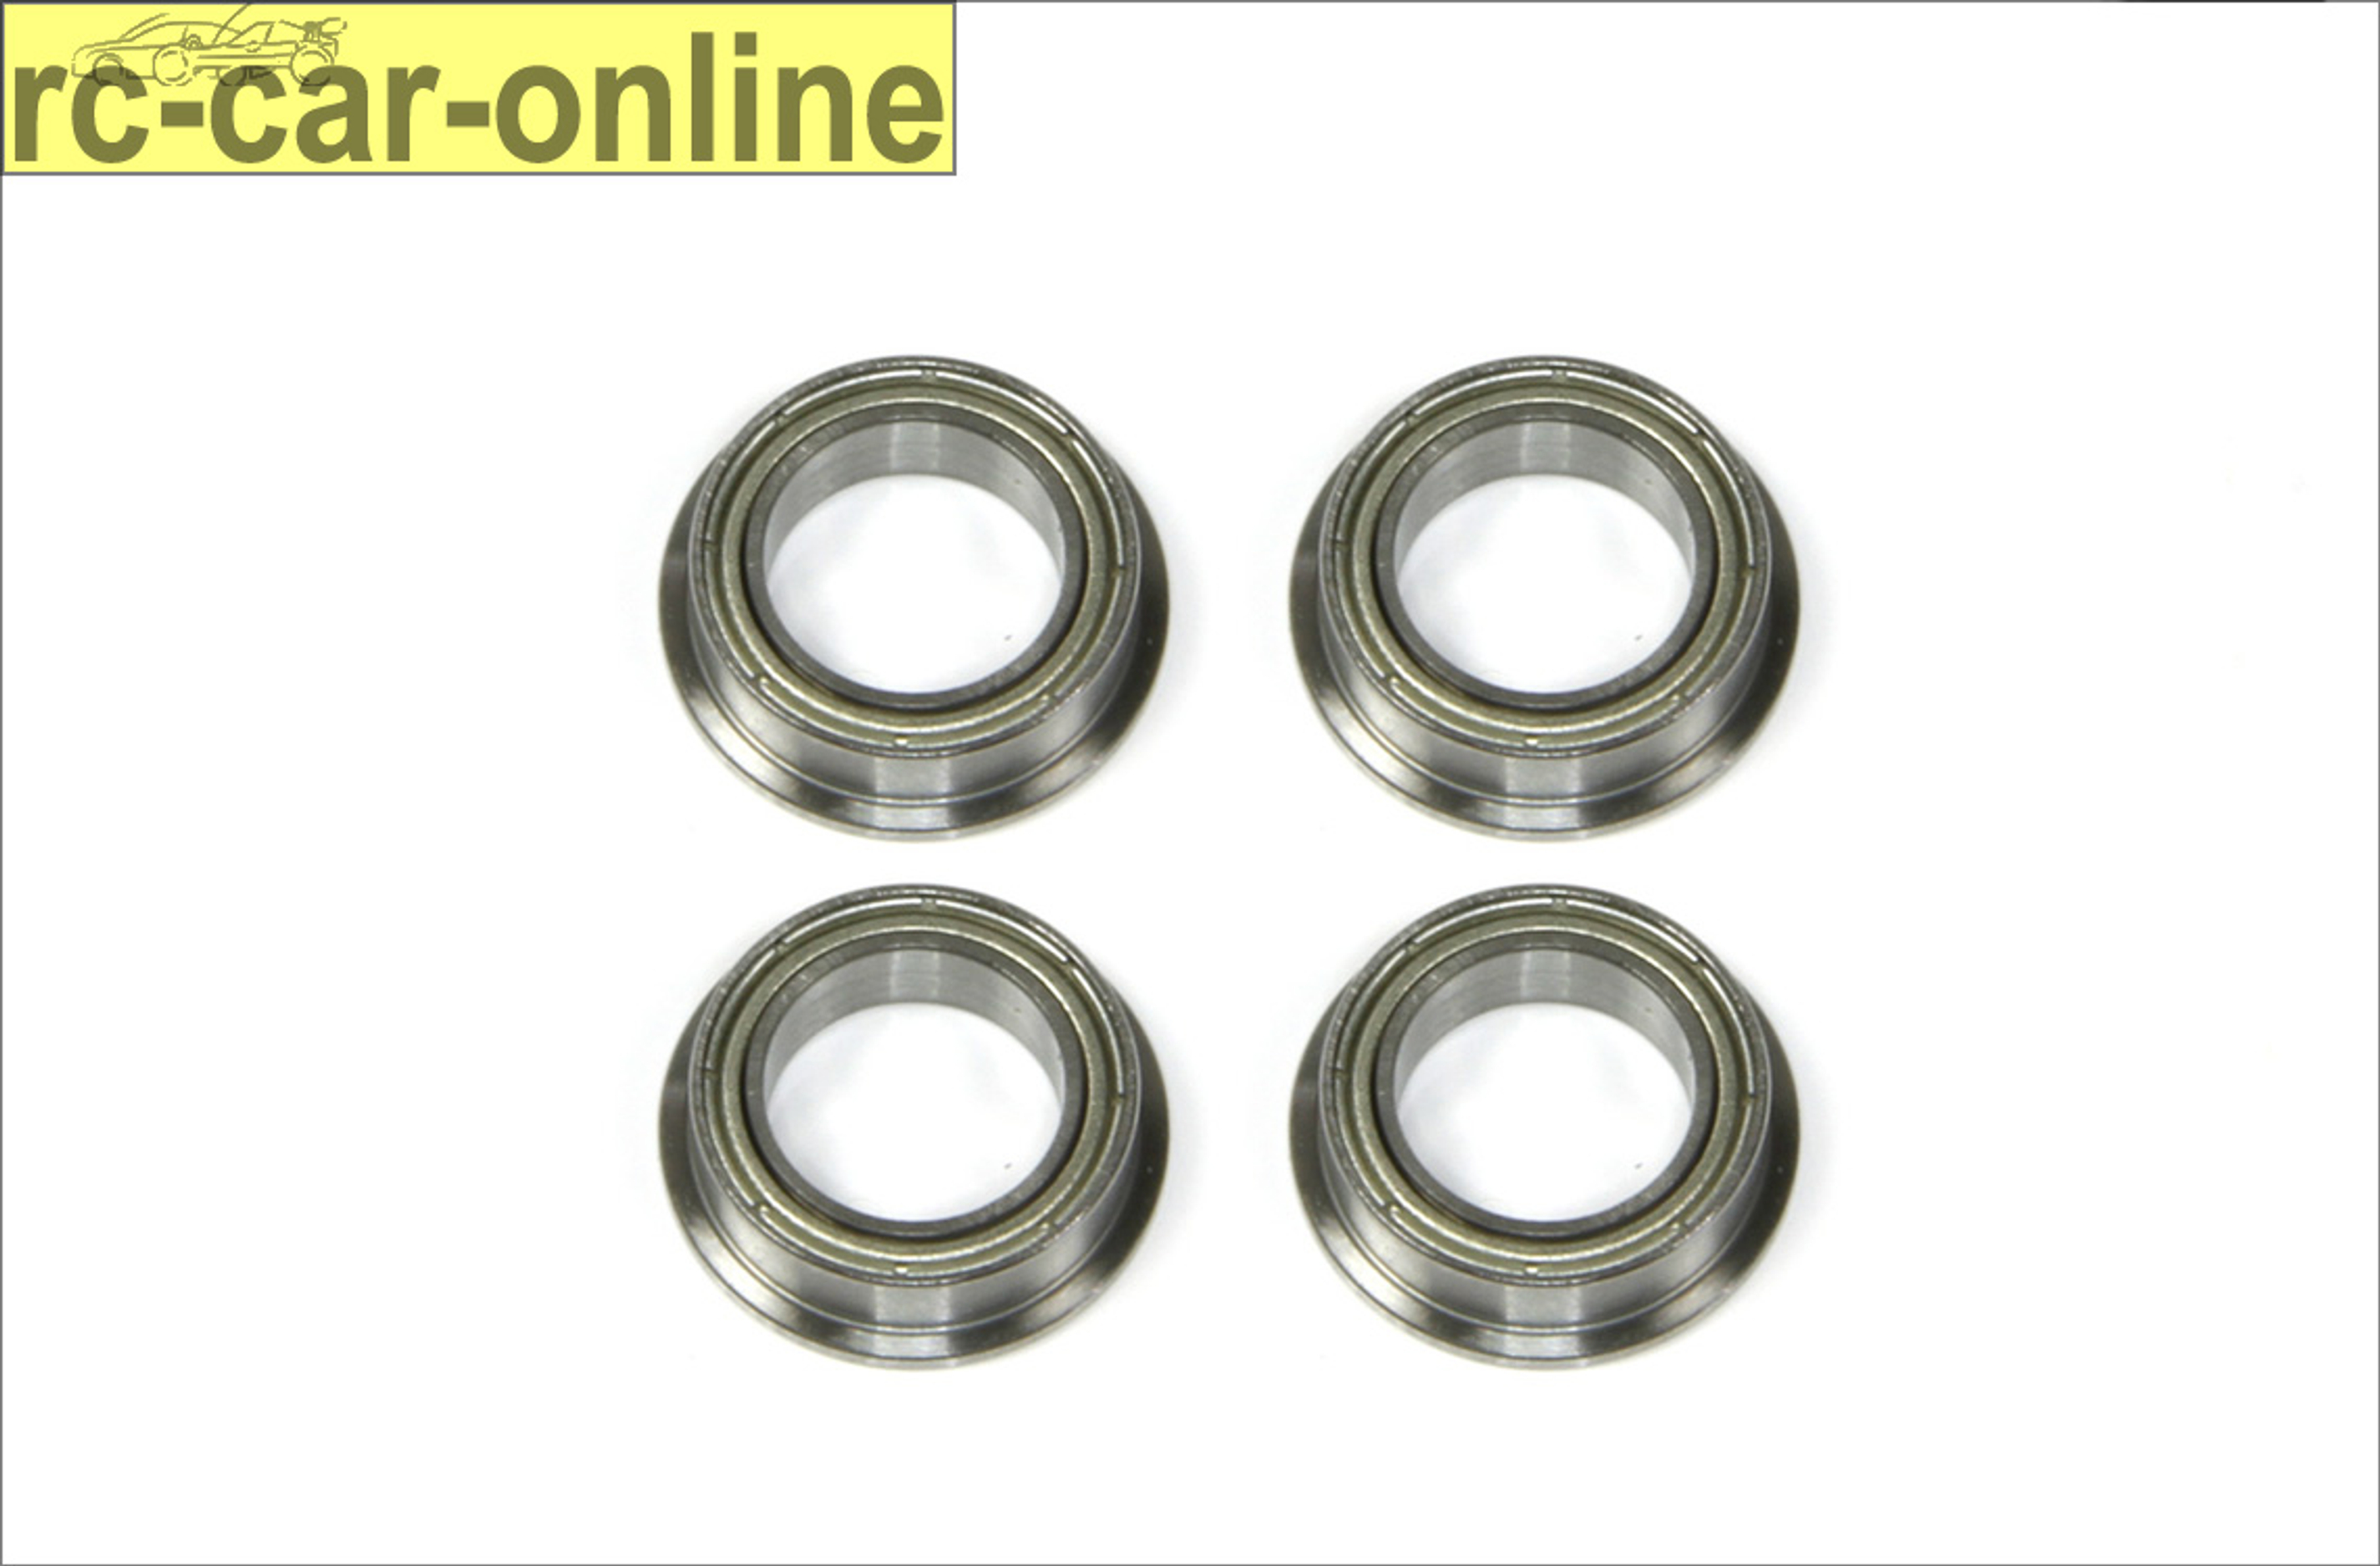 y2012-58/04 Mecatech Flanged Bearing for Antiroll-Bar front and rear 8/12/3,5, set of 4